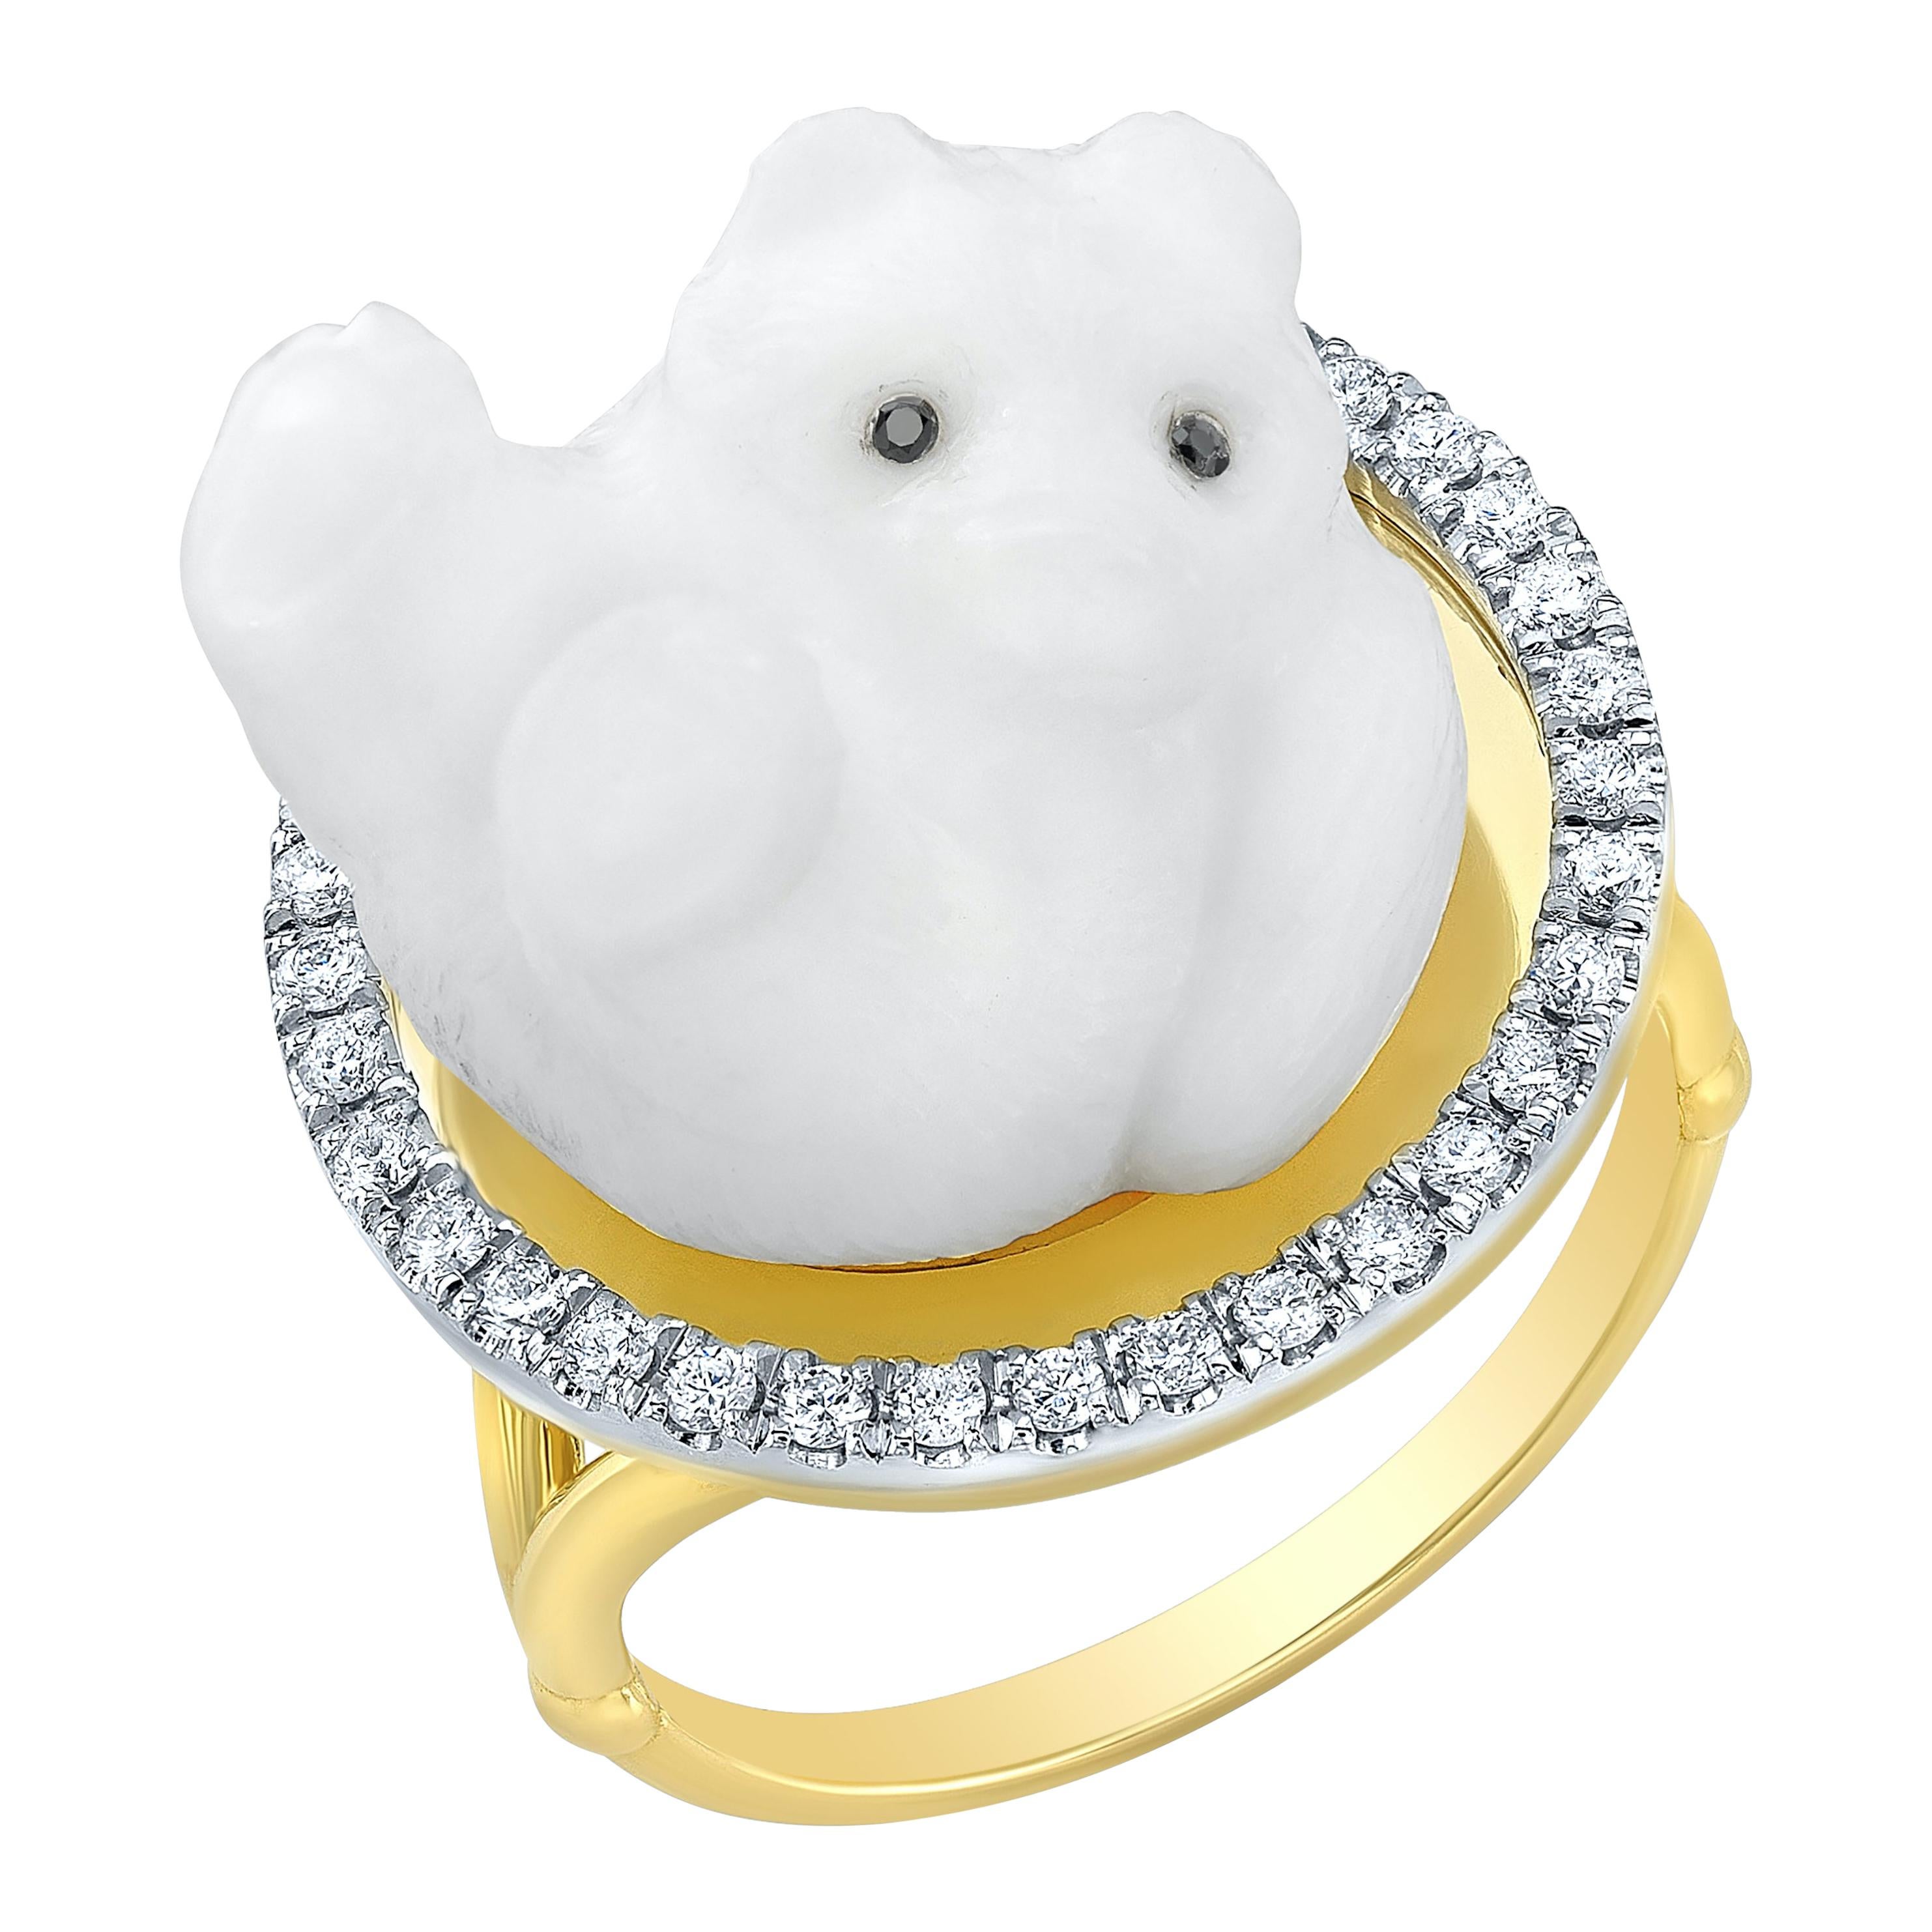 Amy Y's 18 Karat Yellow Gold, Diamond and Opal Contemporary Ring 'Arctic Bear'